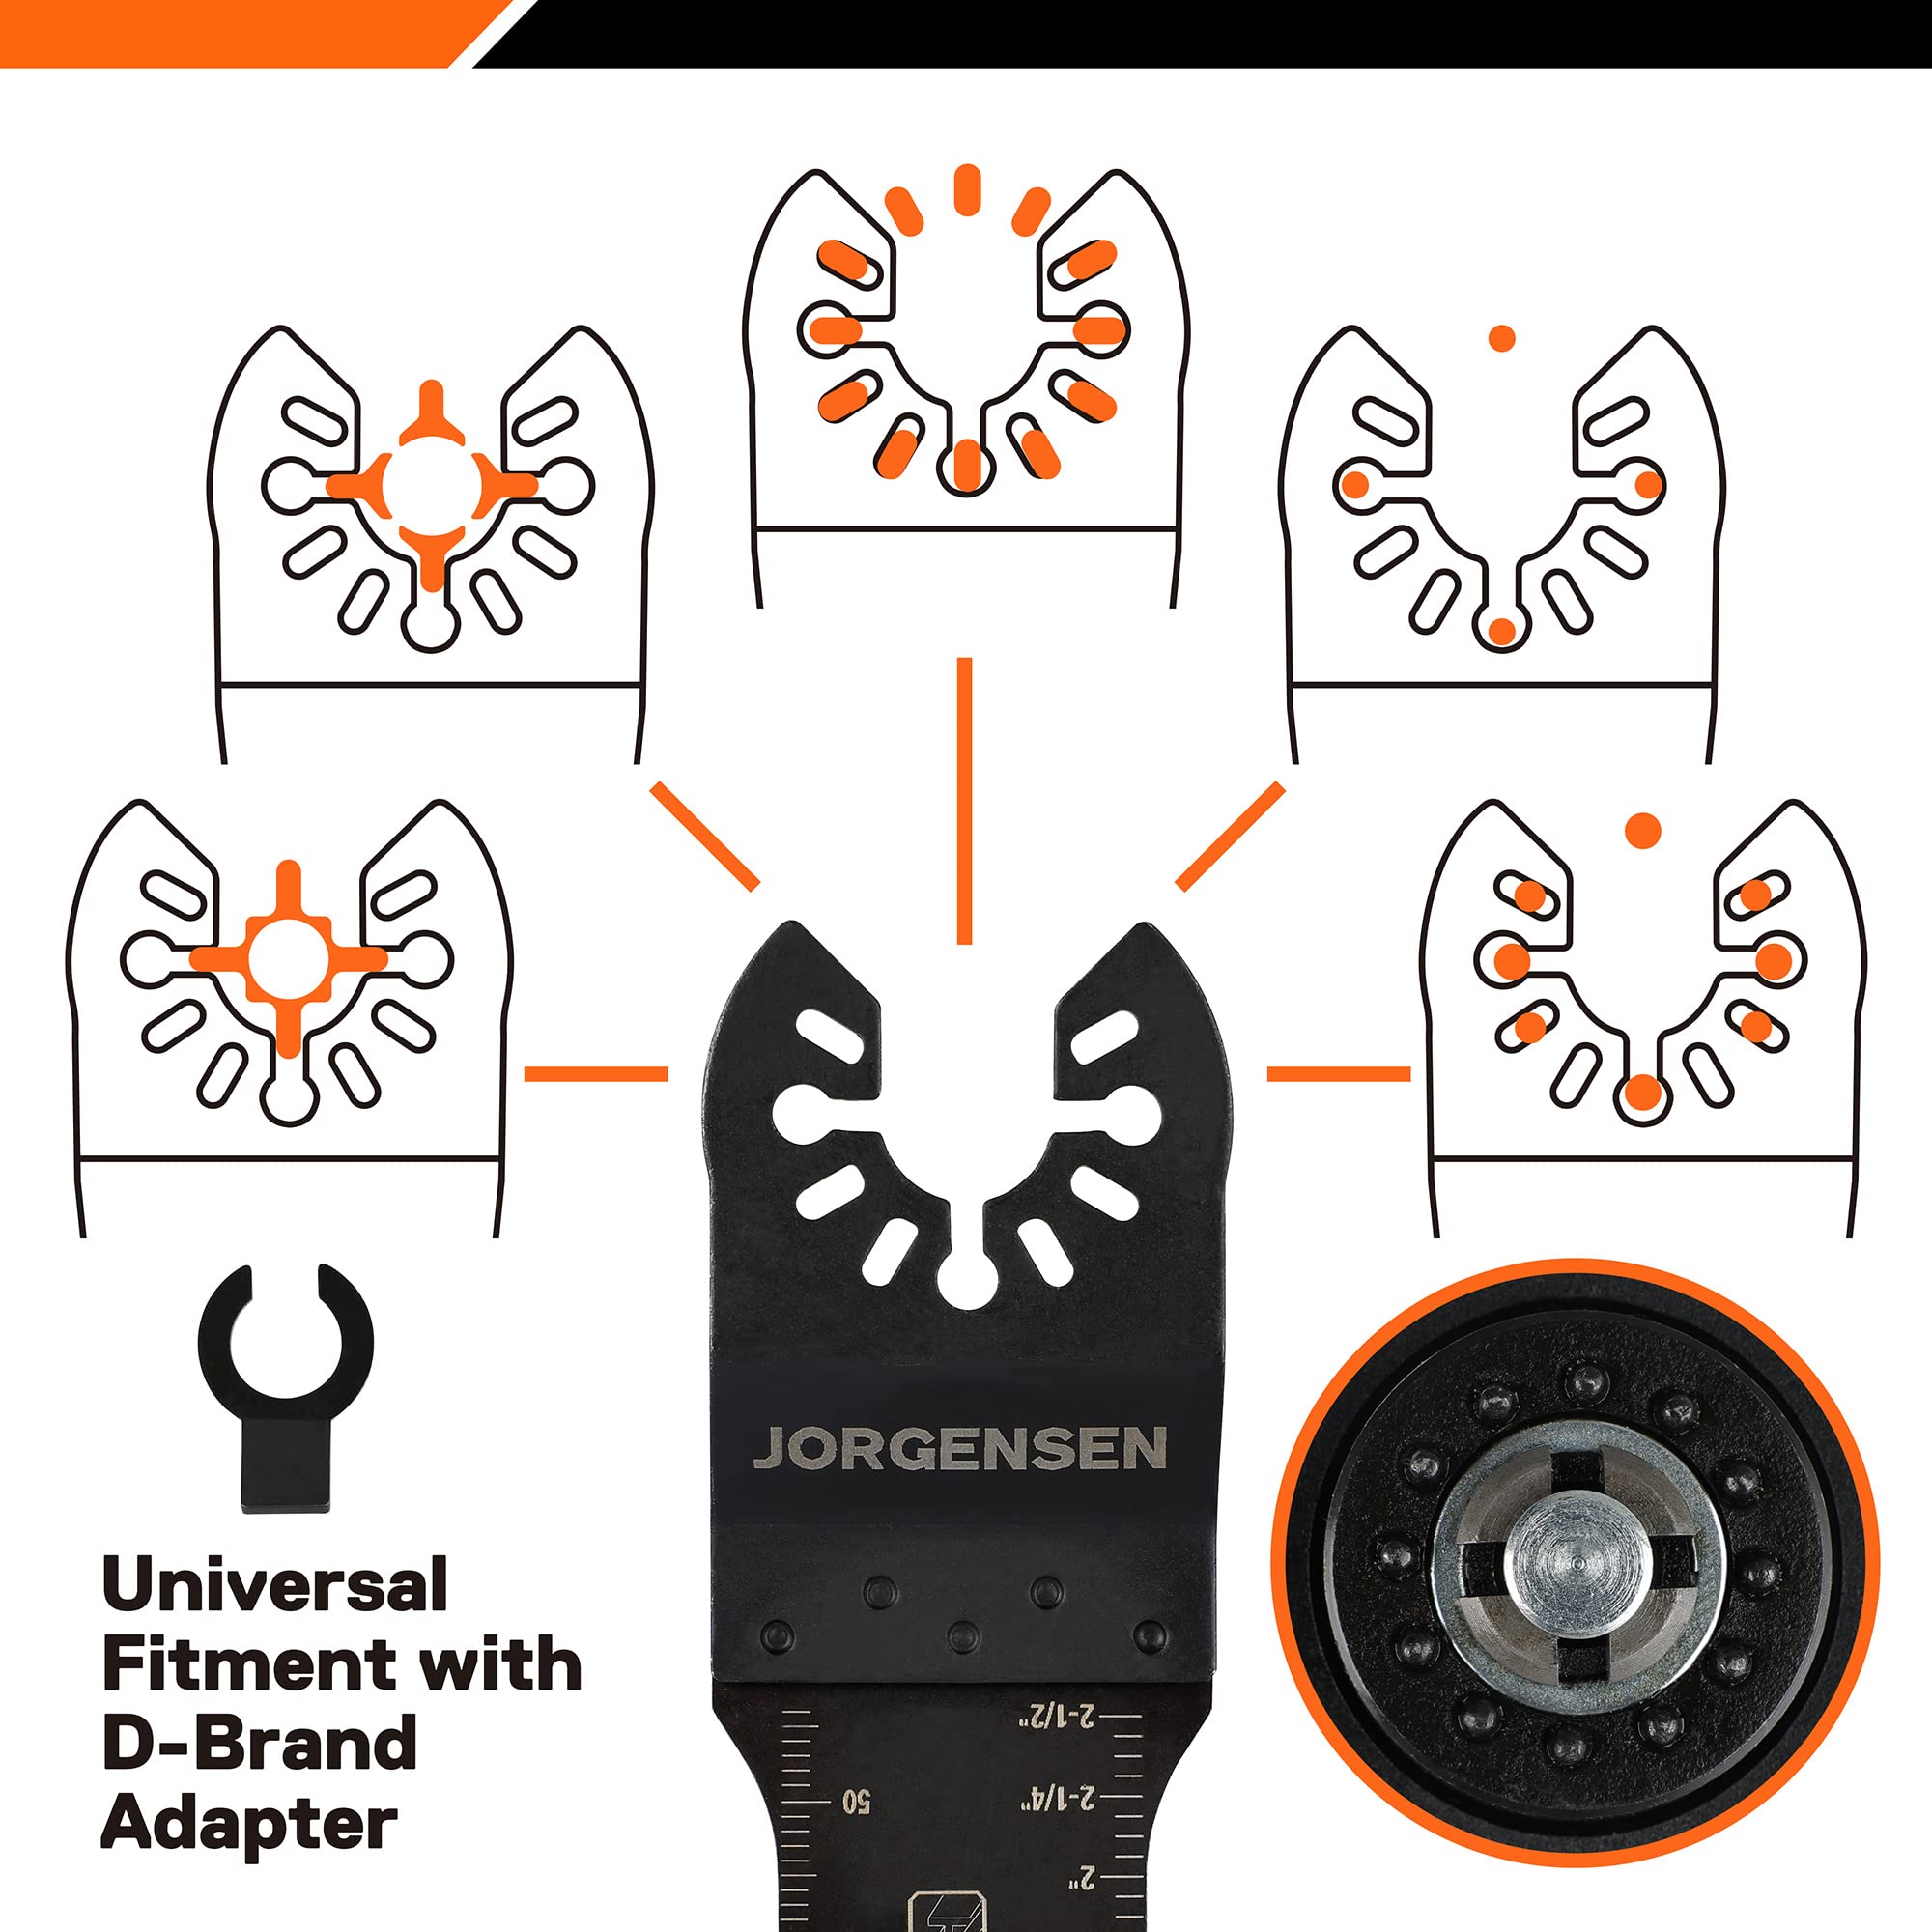 JORGENSEN 5 Pack Oscillating Saw Blades, Bi-Metal Multitool Blades with 2 Adapters, Titanium Coated Universal Multi Oscillating Tool Blade Kits for Plunge/Flush Cut to Multi-Material